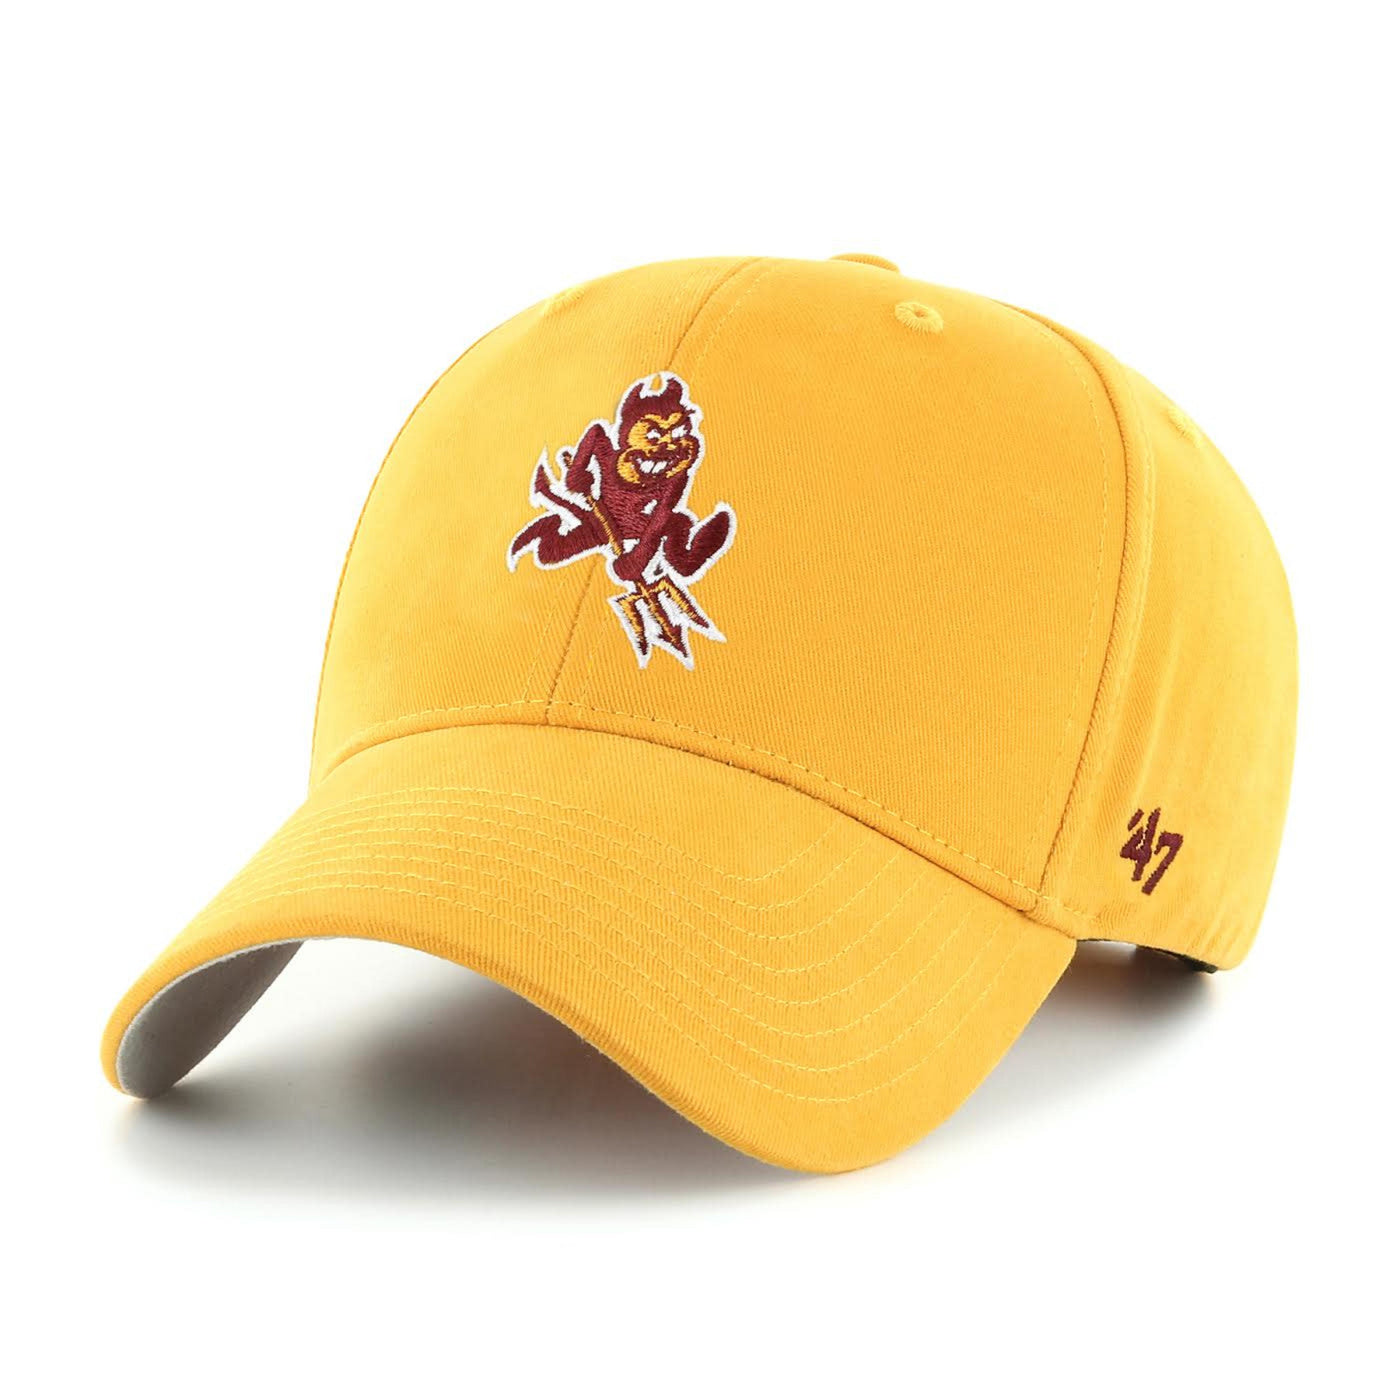 ASU gold adjustable hat from 47brand with a Sparky on the front